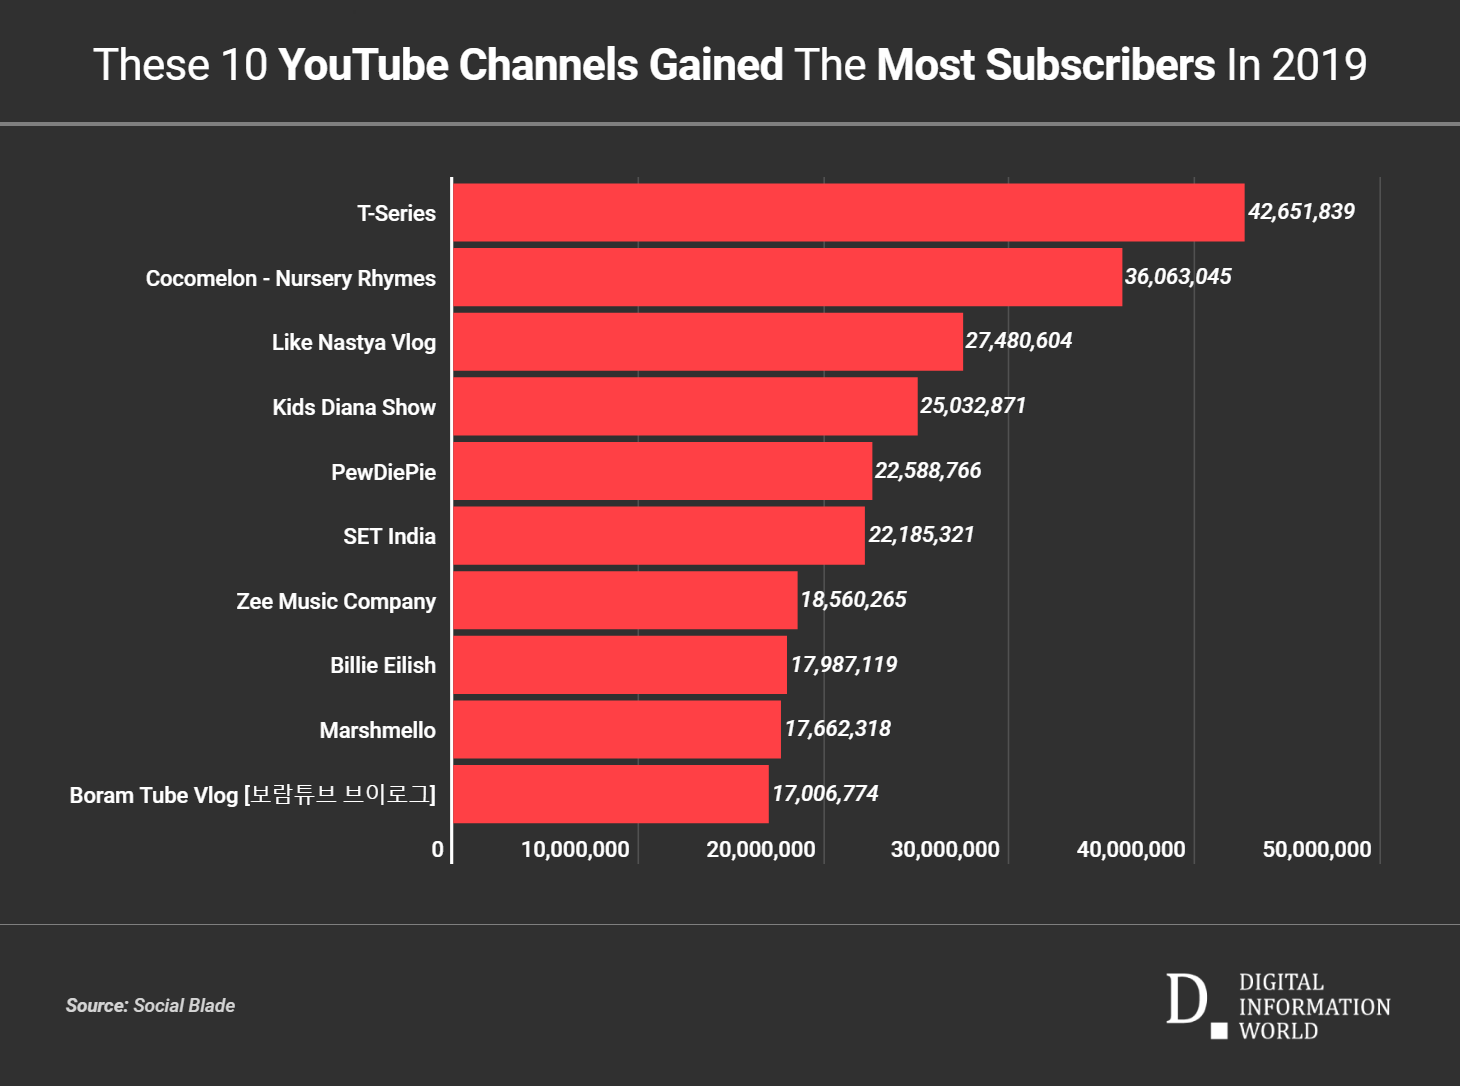 These are the Top 10 Fastest Growing YouTube Channels of 2019